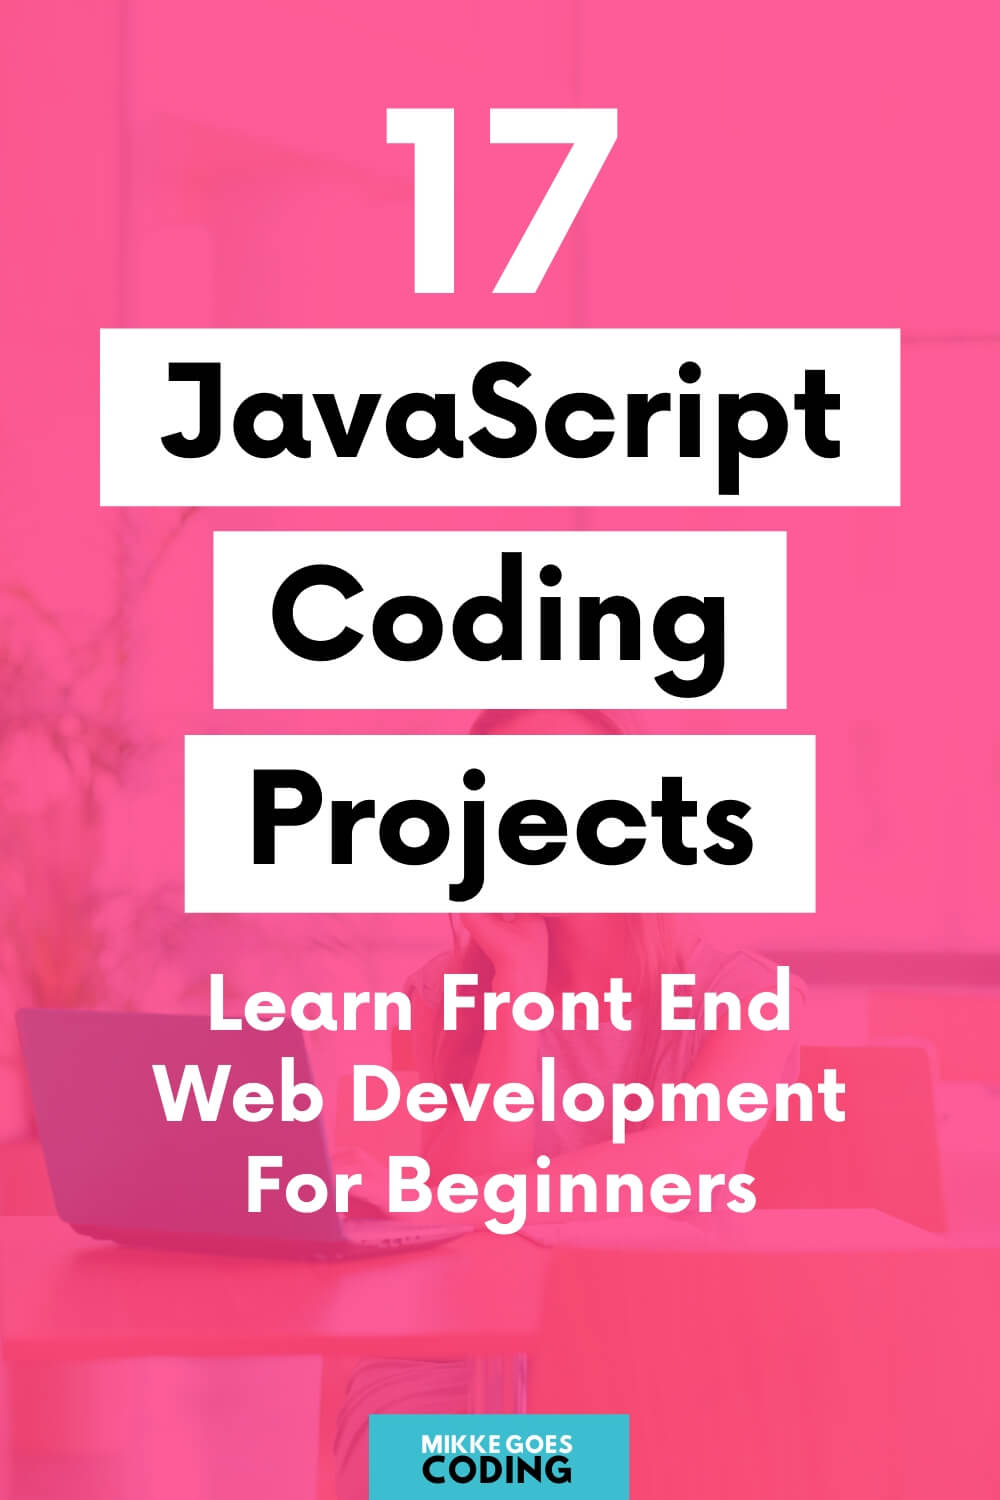 20 JavaScript Projects for Beginners For 2020 With Source Code